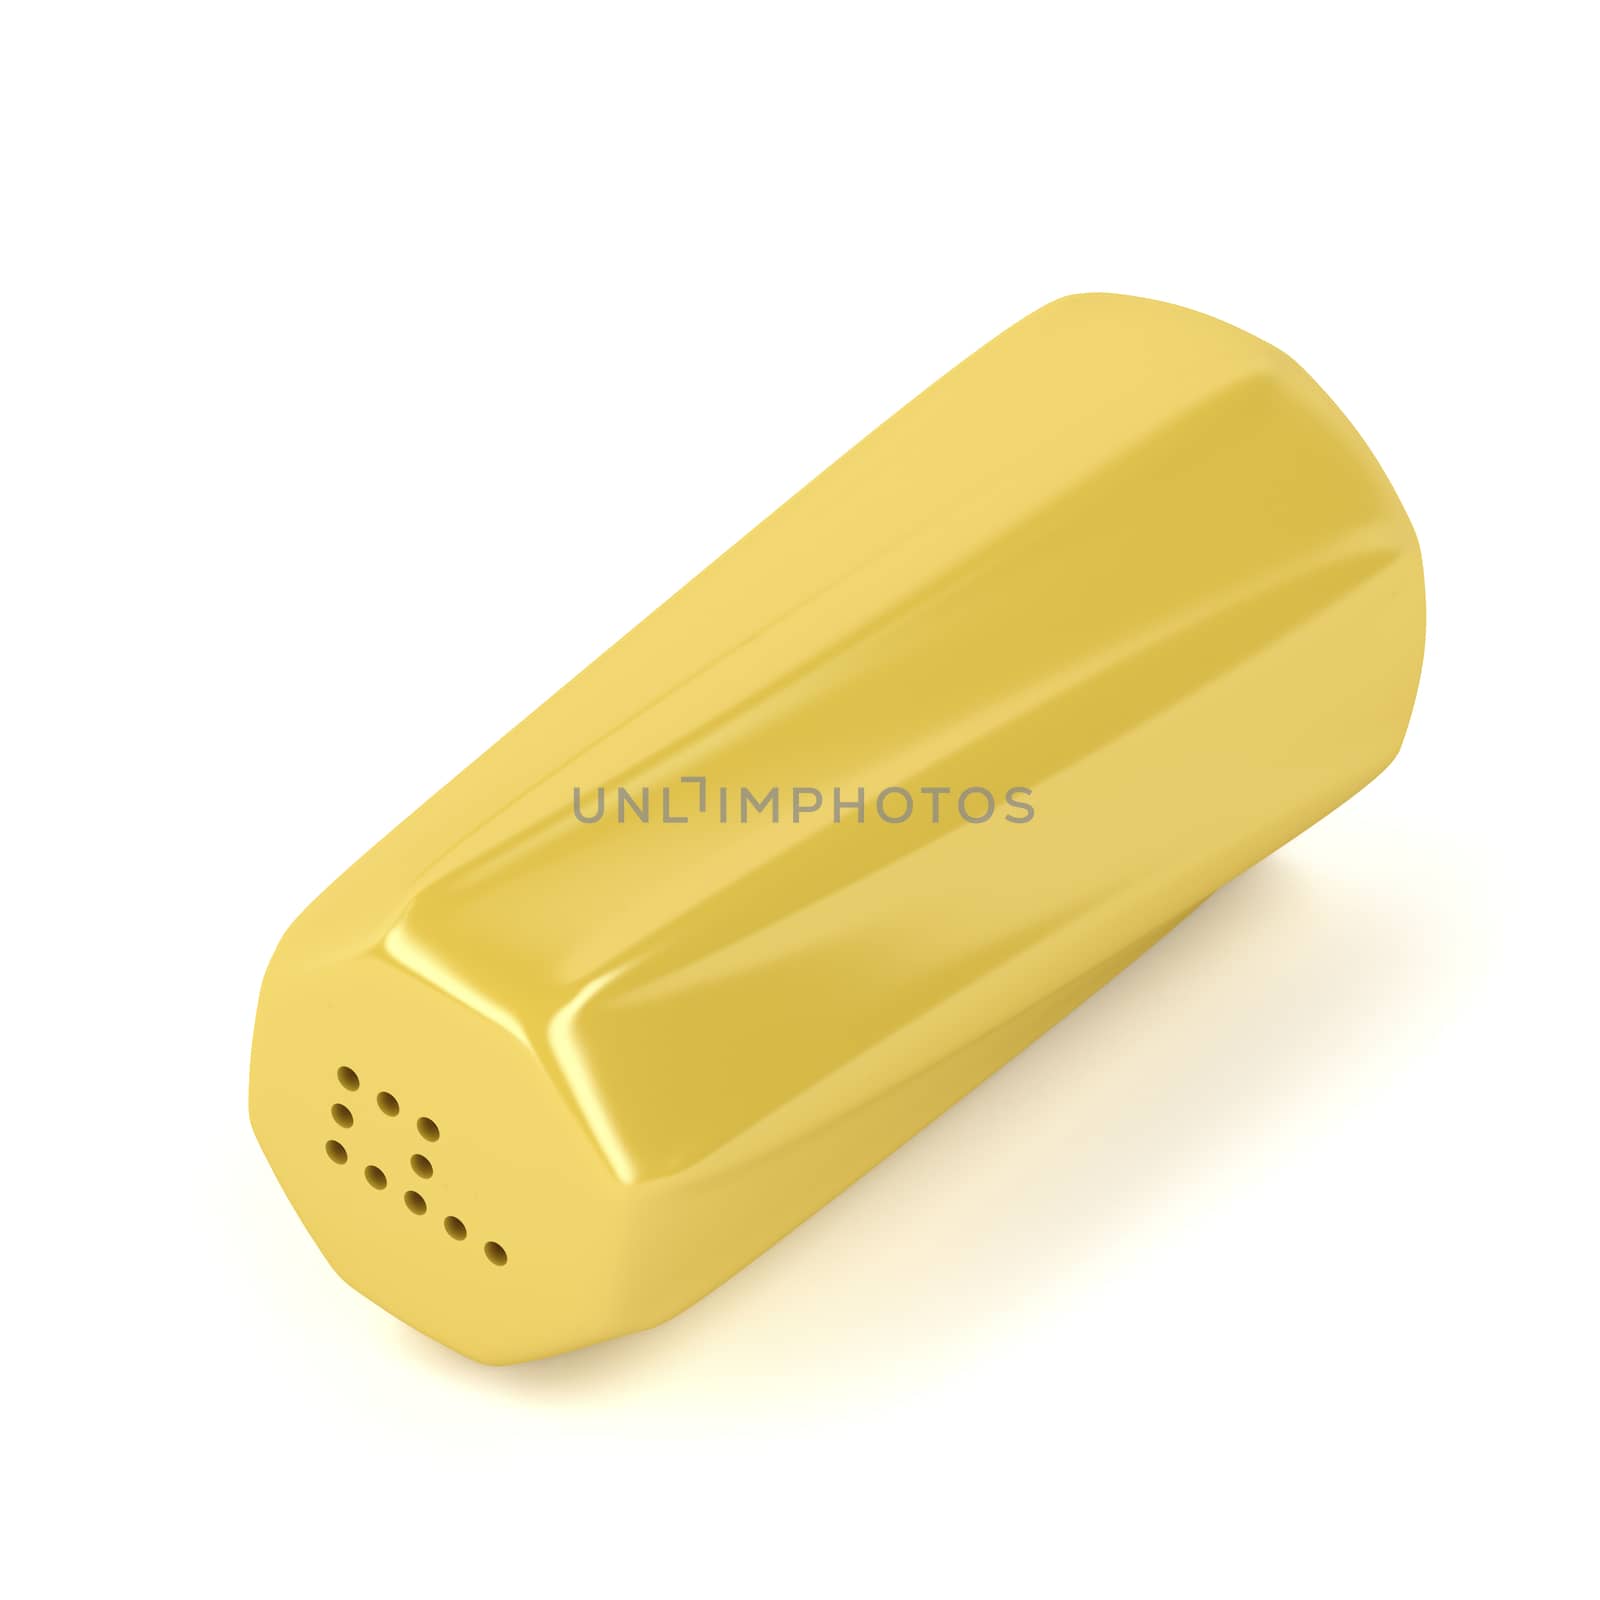 Yellow pepper shaker by magraphics